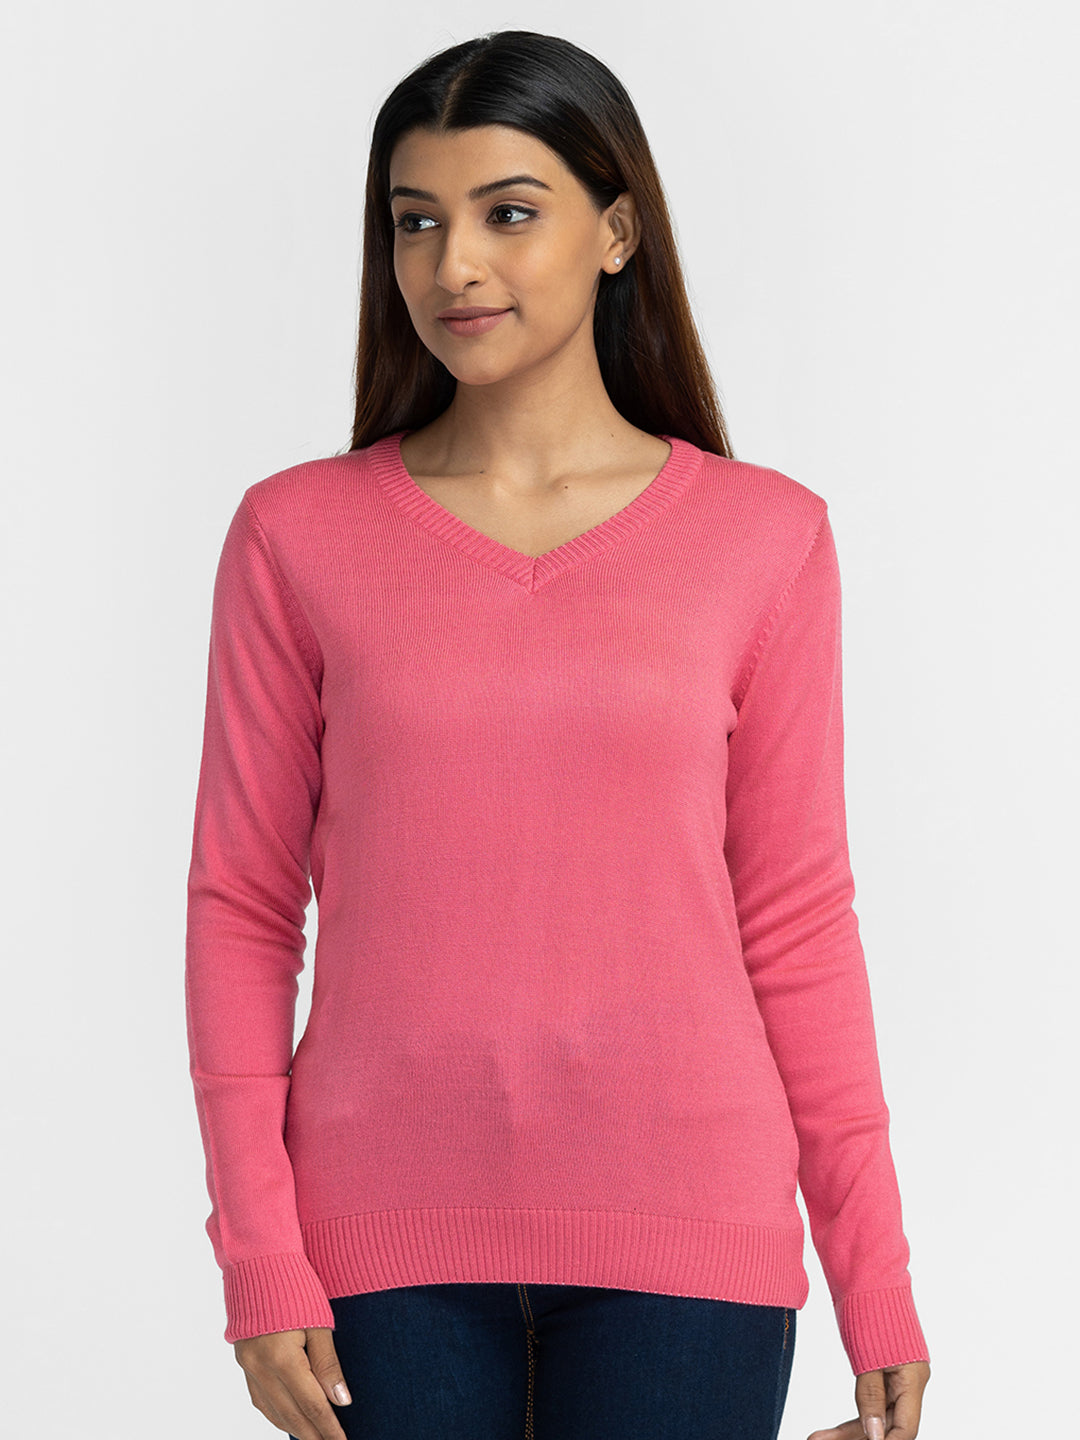 Globus Pink Solid Pullover Sweater